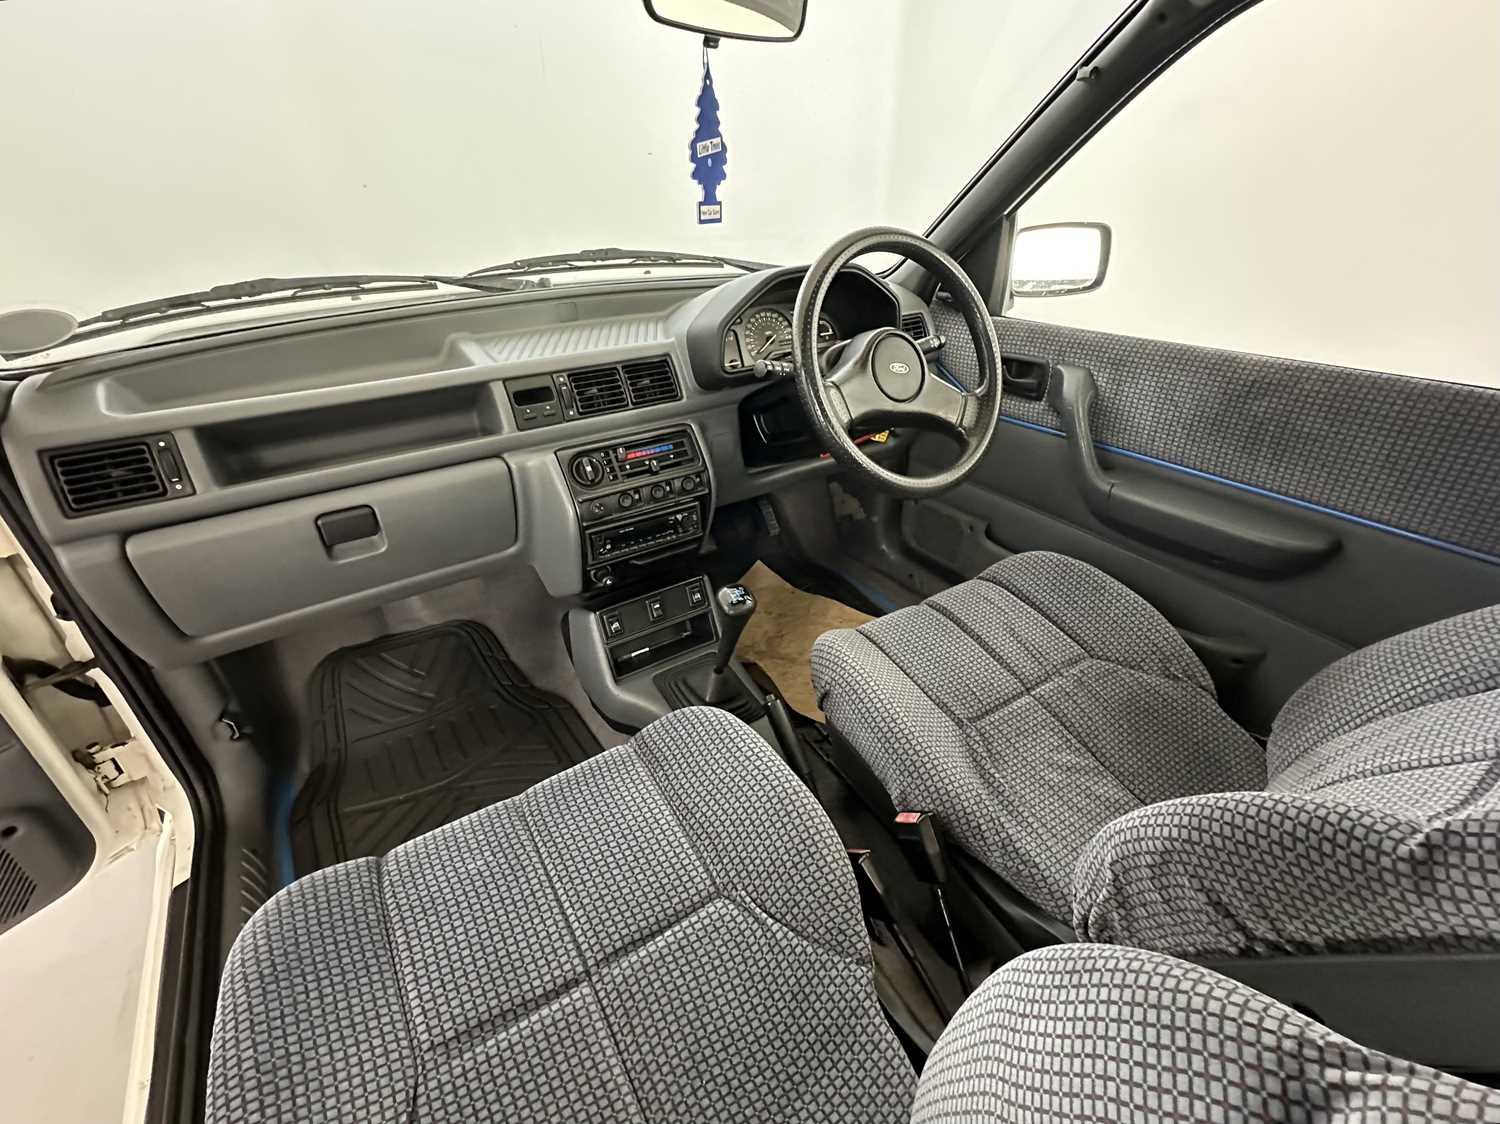 1991 Ford Fiesta XR2i - Image 23 of 30